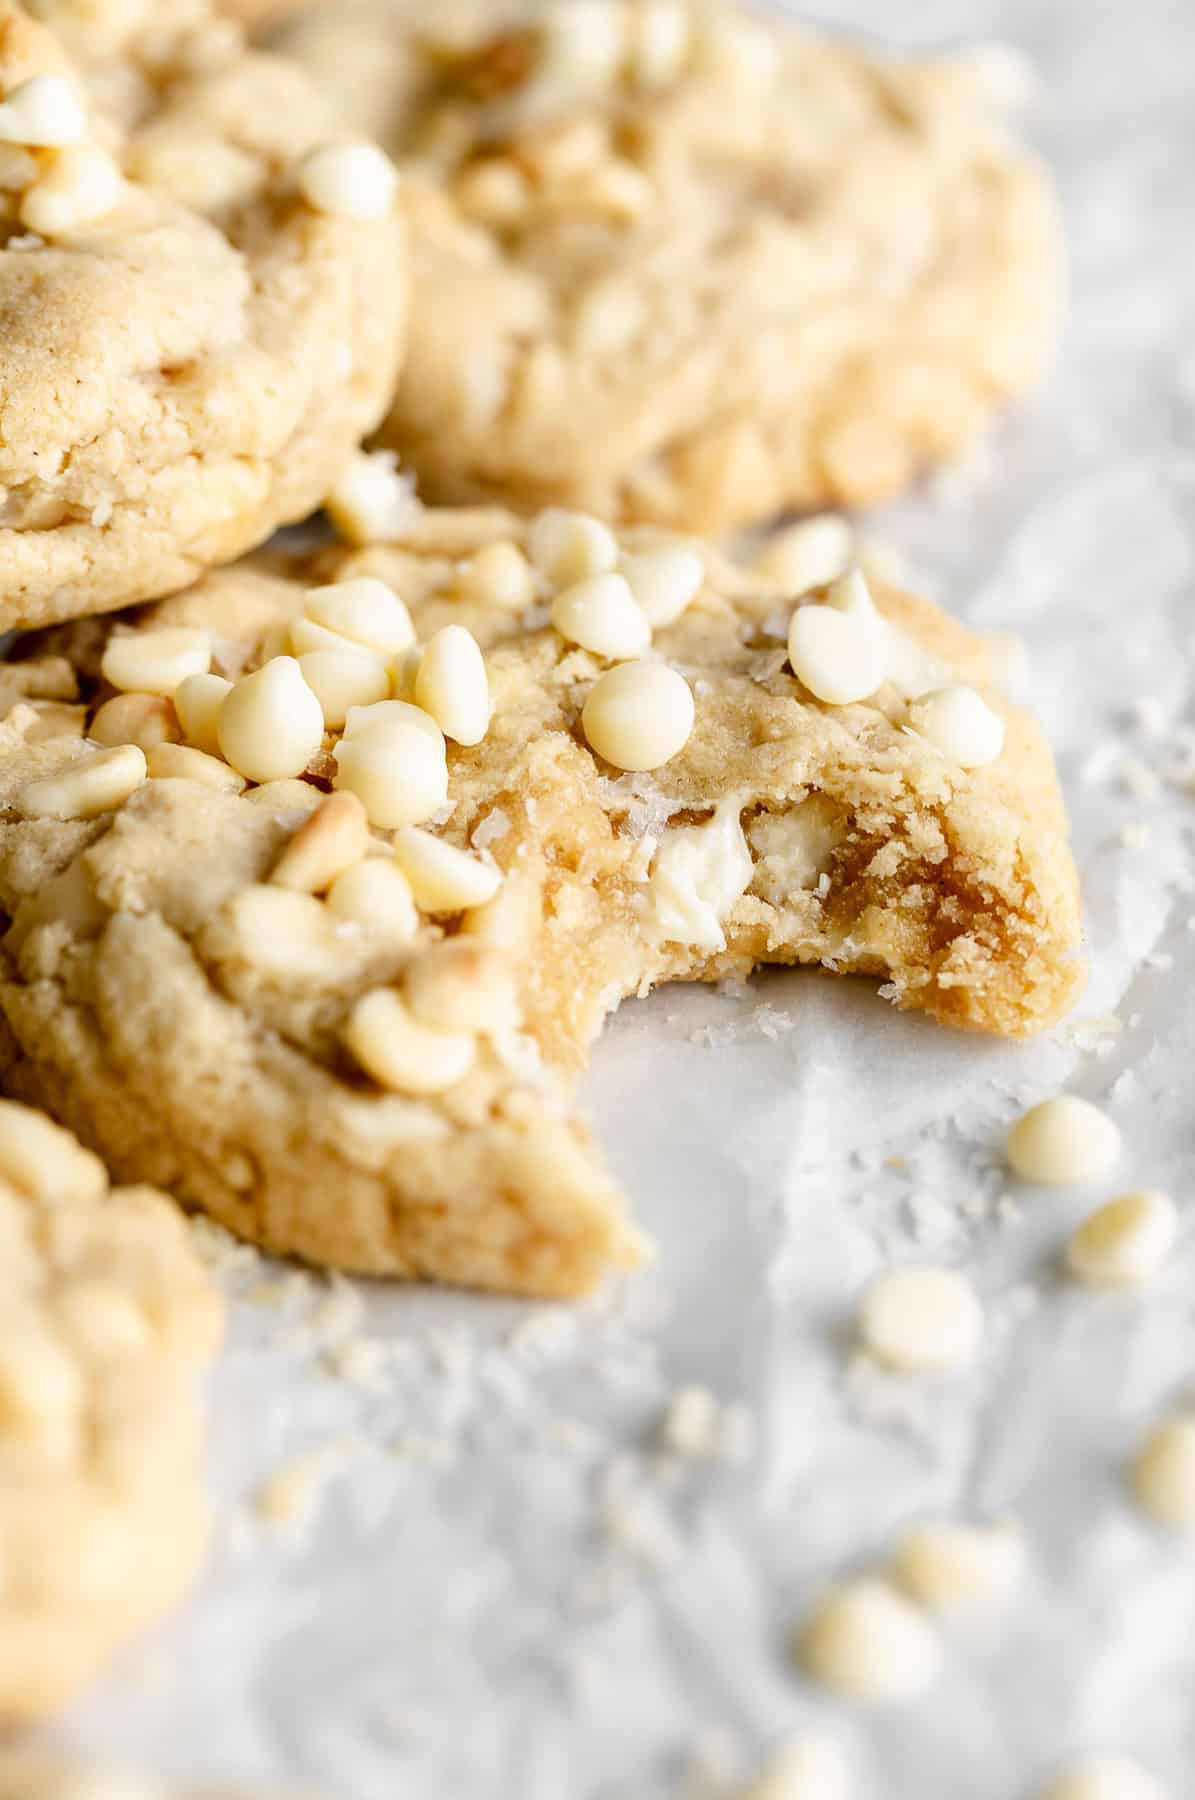 one bite taken out of the gluten free white chocolate macadamia nut cookie with sea salt